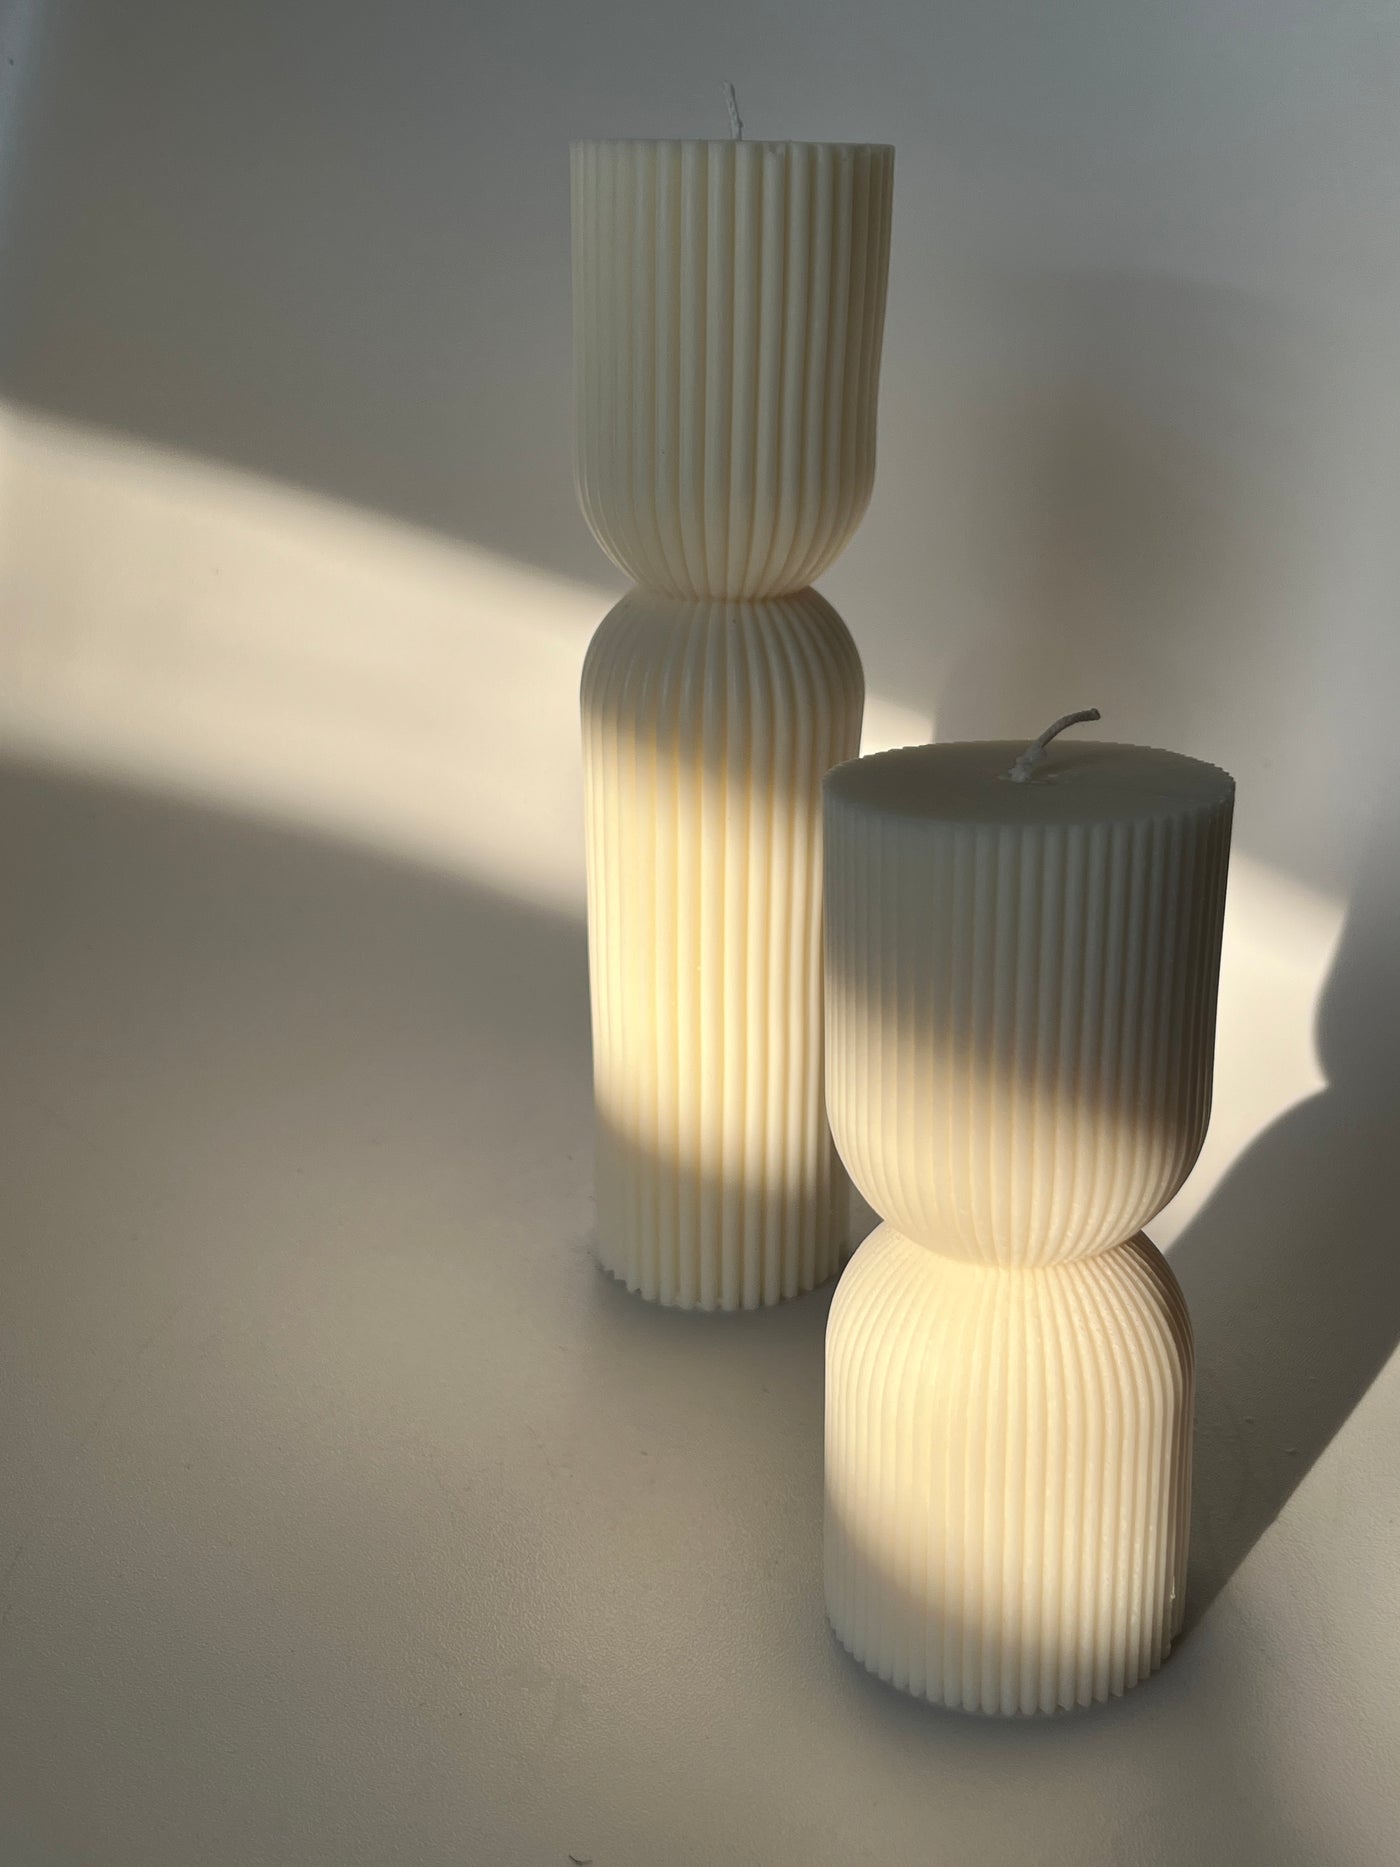 Striped Column Candle